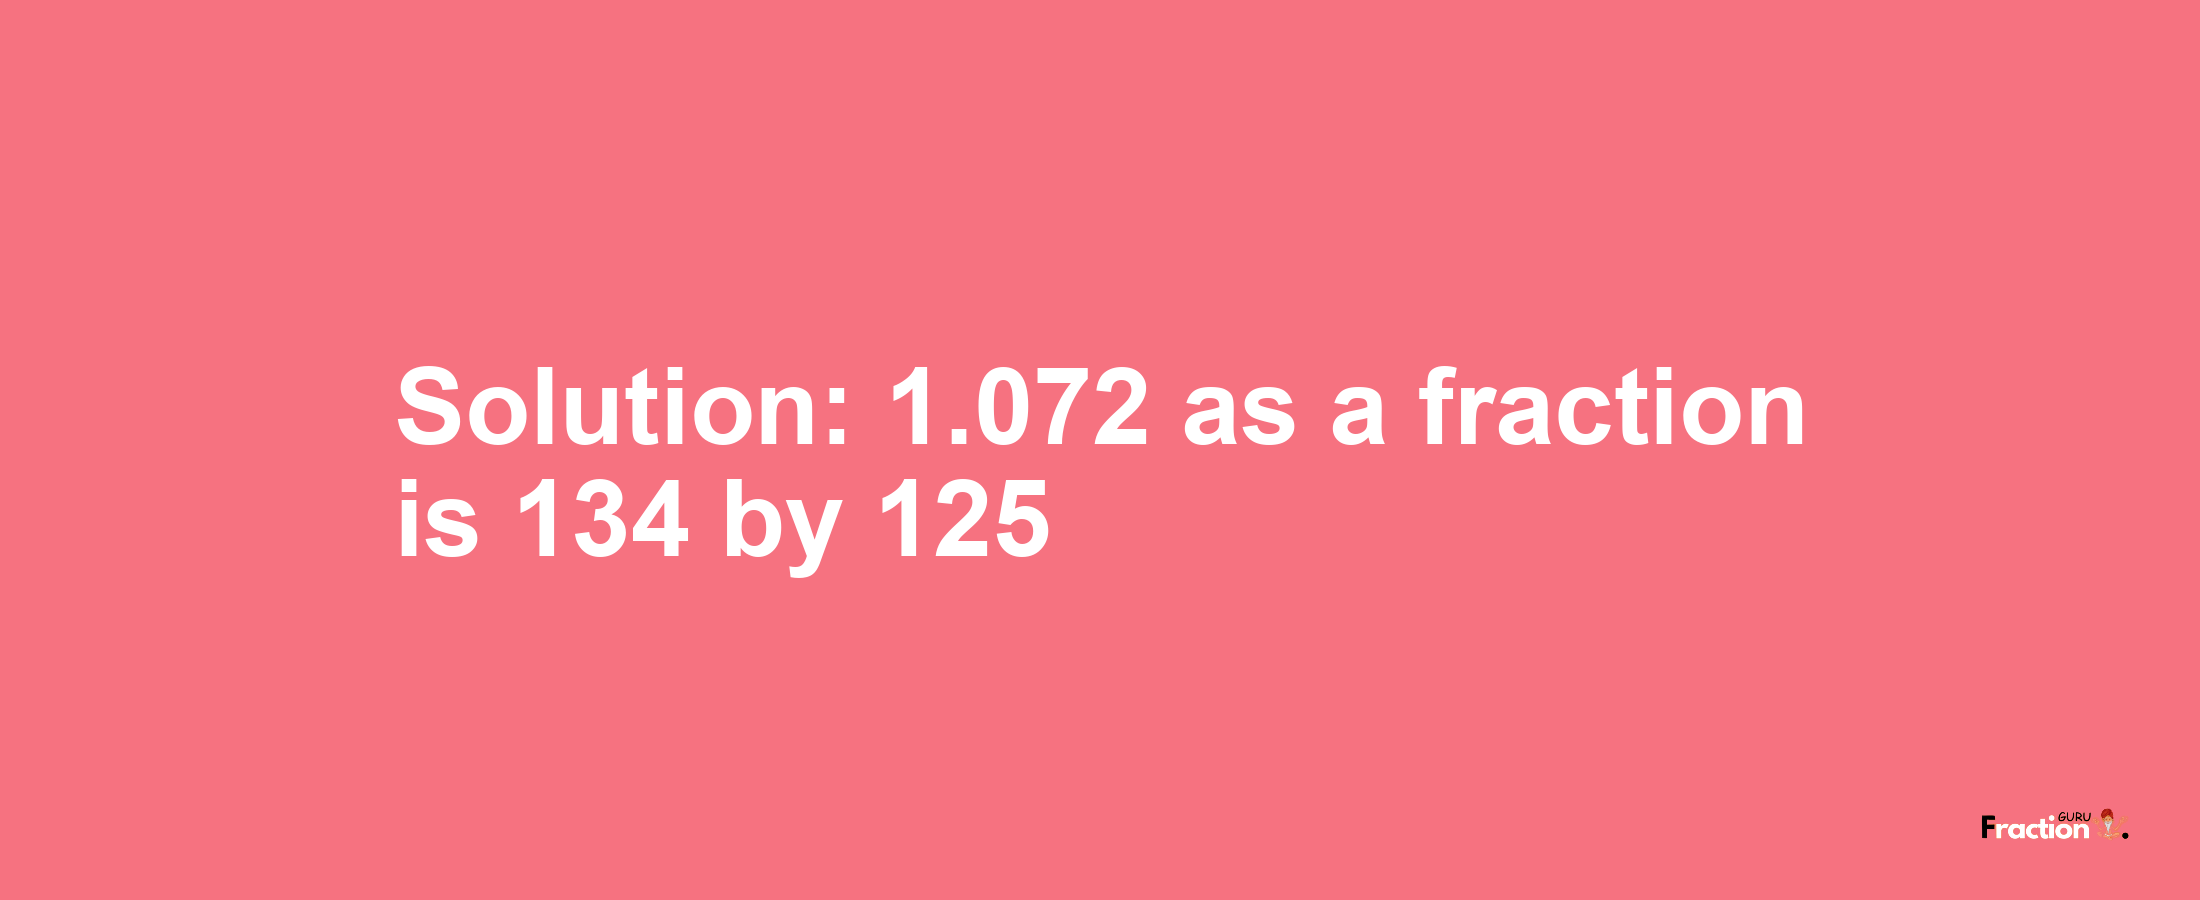 Solution:1.072 as a fraction is 134/125